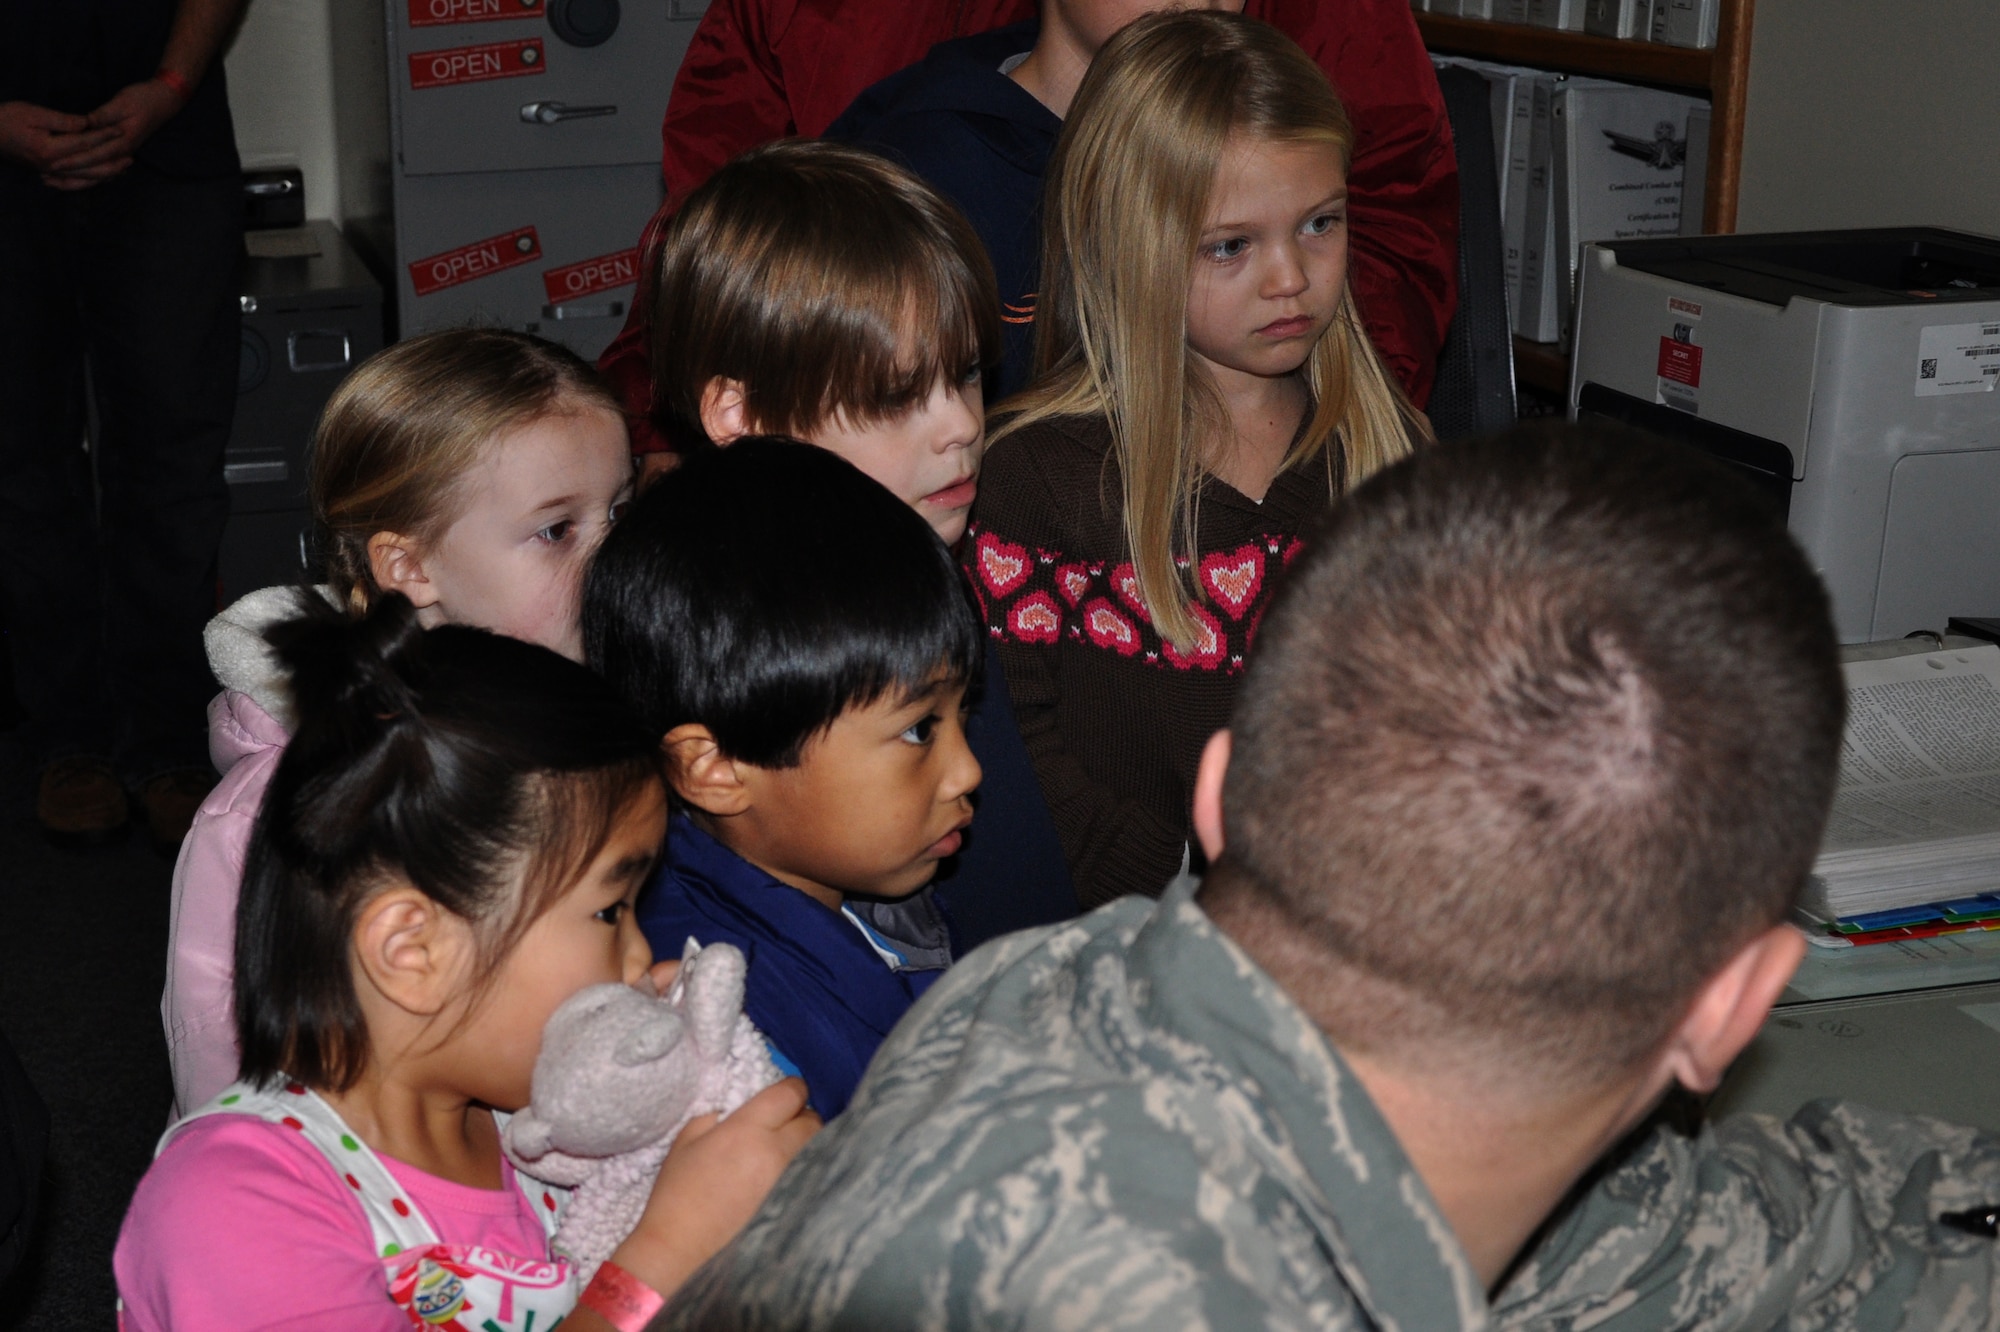 A member of the 7th Space Warning Squadron shows children where Santa is flying around the world during the NORAD Santa Tracking event on Christmas Eve. 7th SWS invites children and families primarily of deployed Airmen up to the radar tower to help track Santa Claus on his sleigh. (U.S. Air Force photo by 2nd Lt. Siobhan G. Bennett/Released)